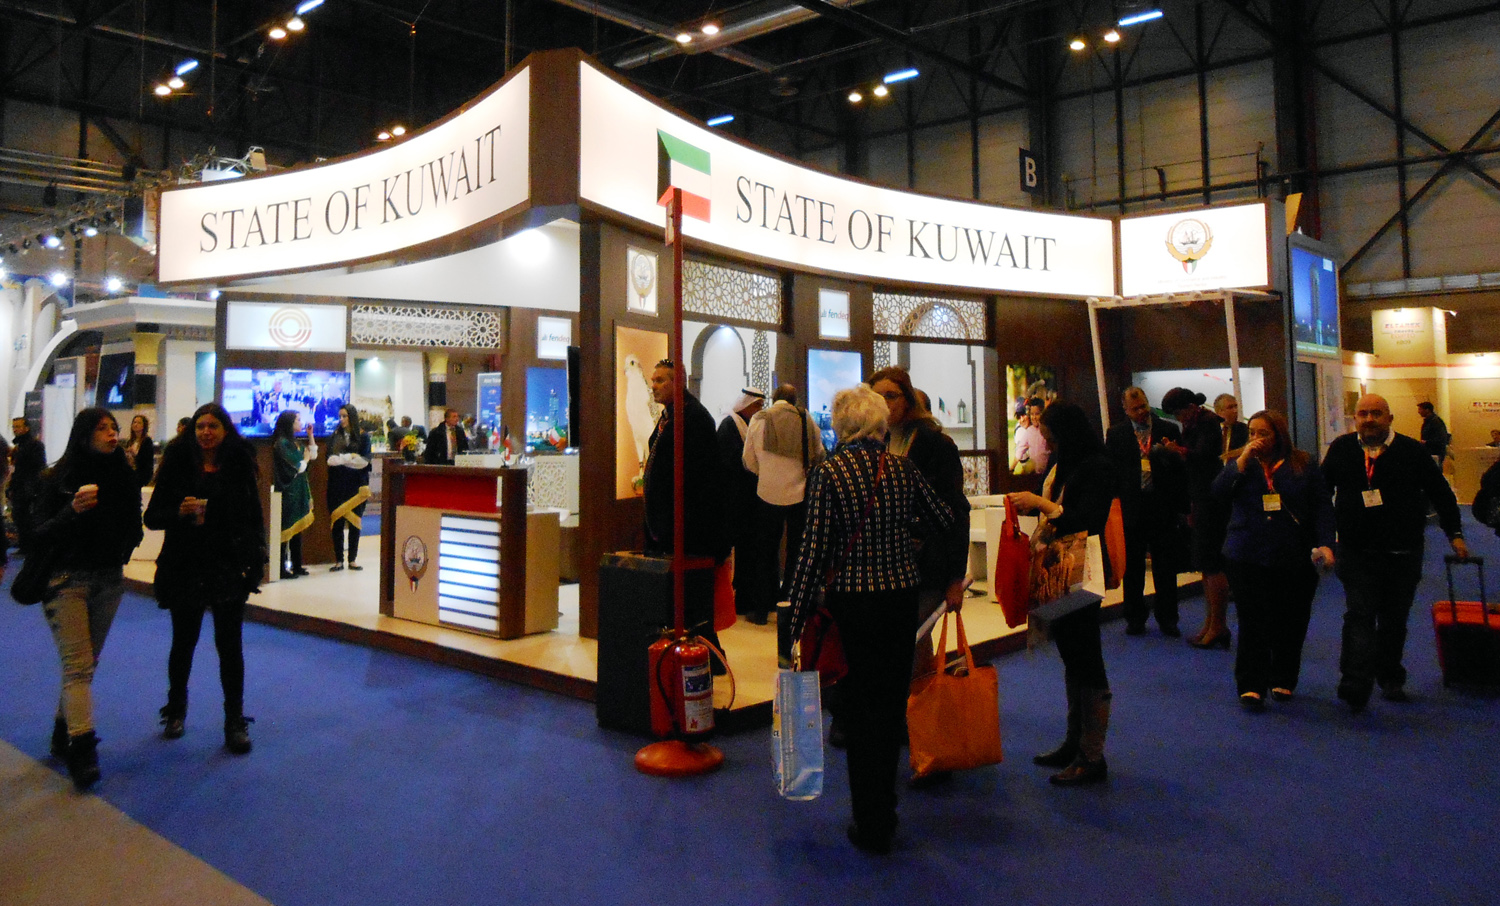 Kuwaiti pavilion at the 35th International Tourism Trade Fair (FITUR 2015) in Spain